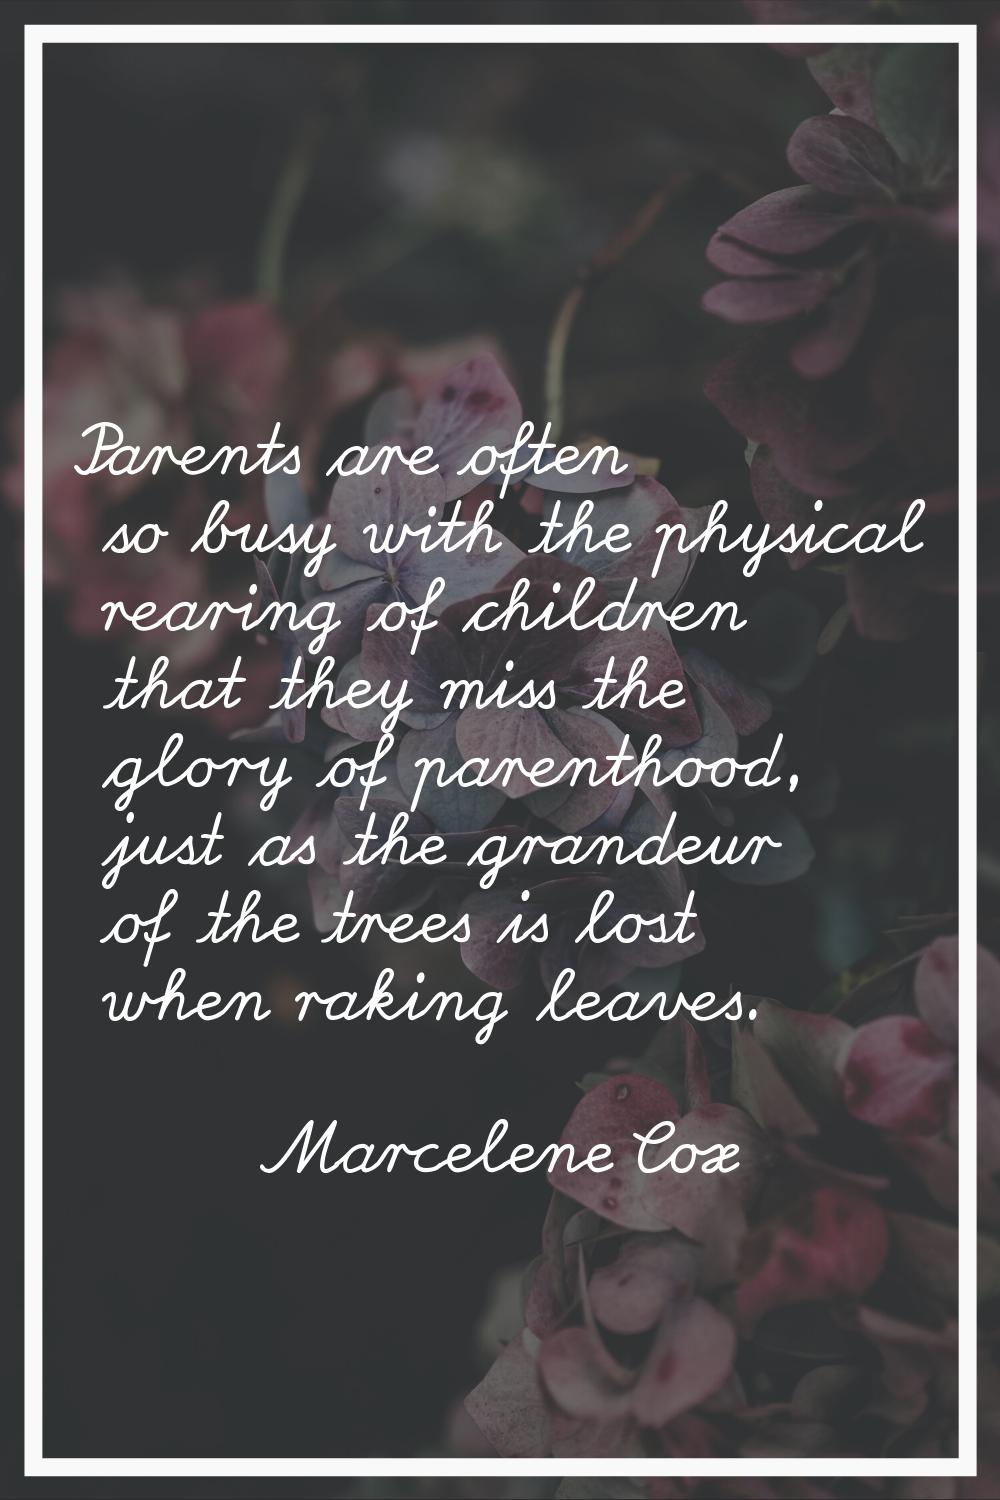 Parents are often so busy with the physical rearing of children that they miss the glory of parenth